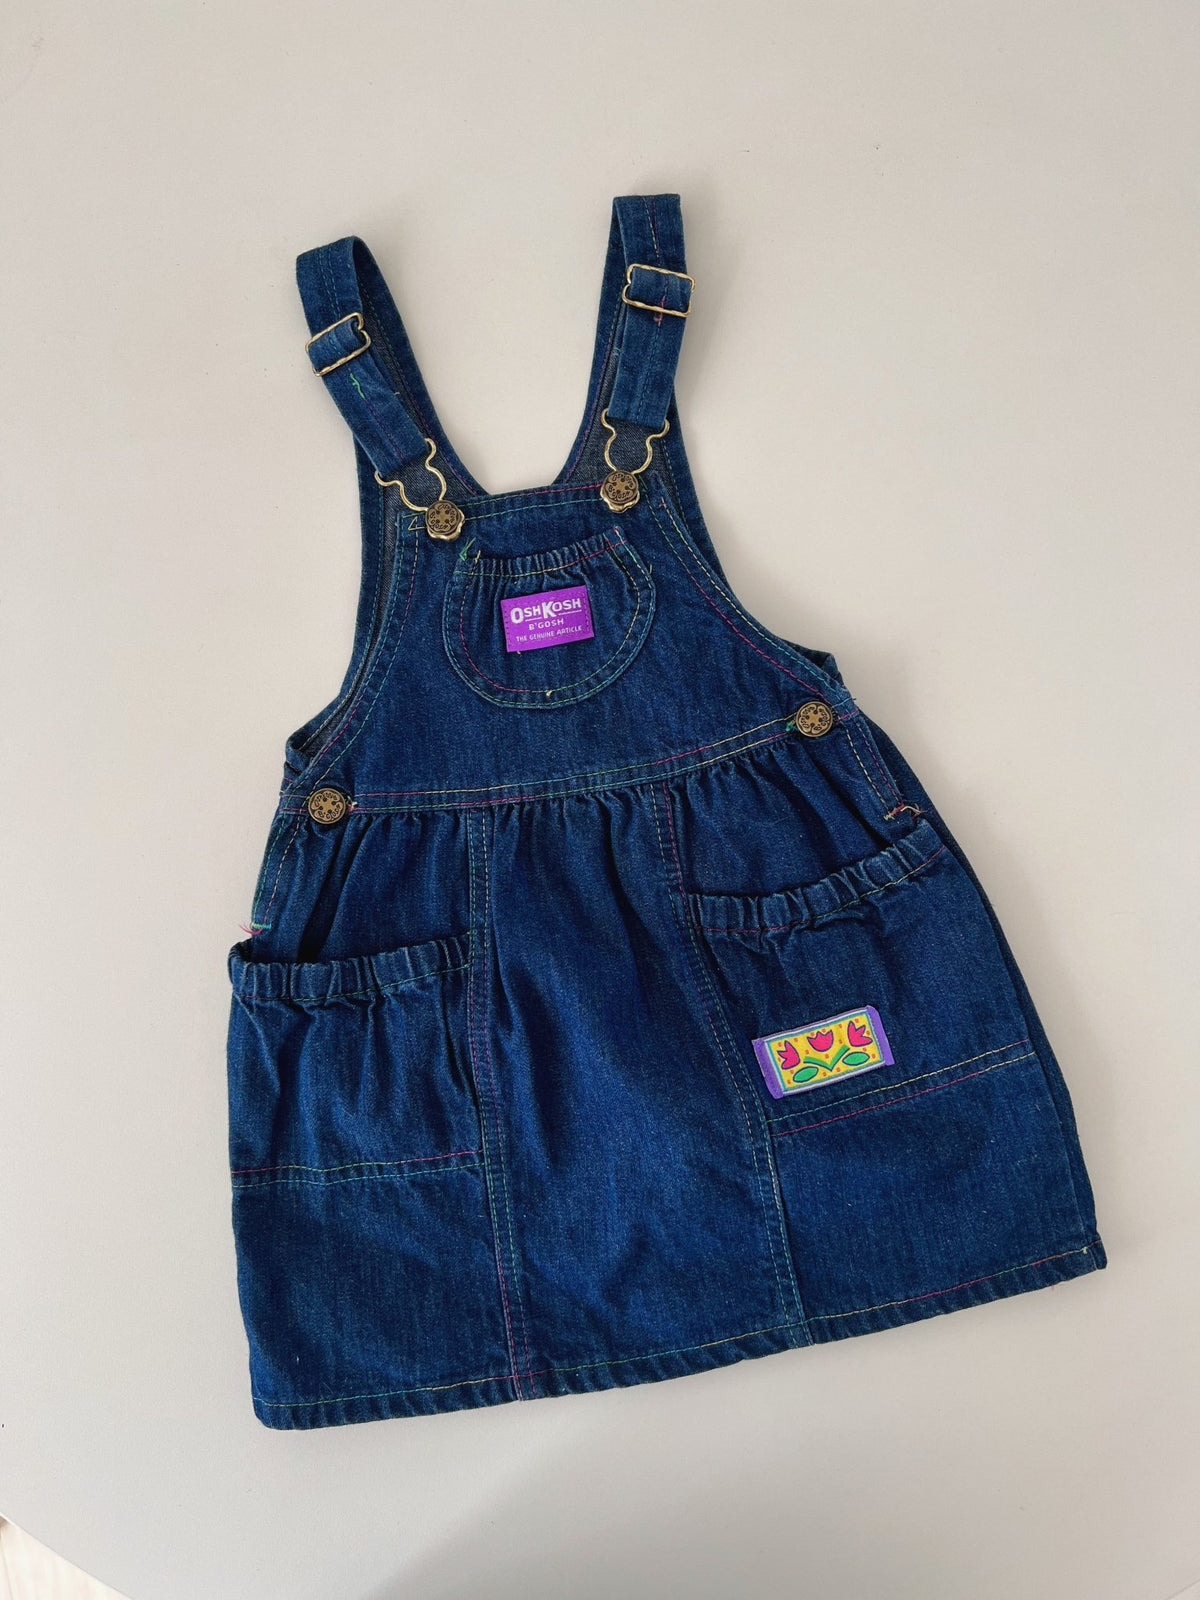 Oshkosh pinafore pre loved 4t - Marlow and Mae